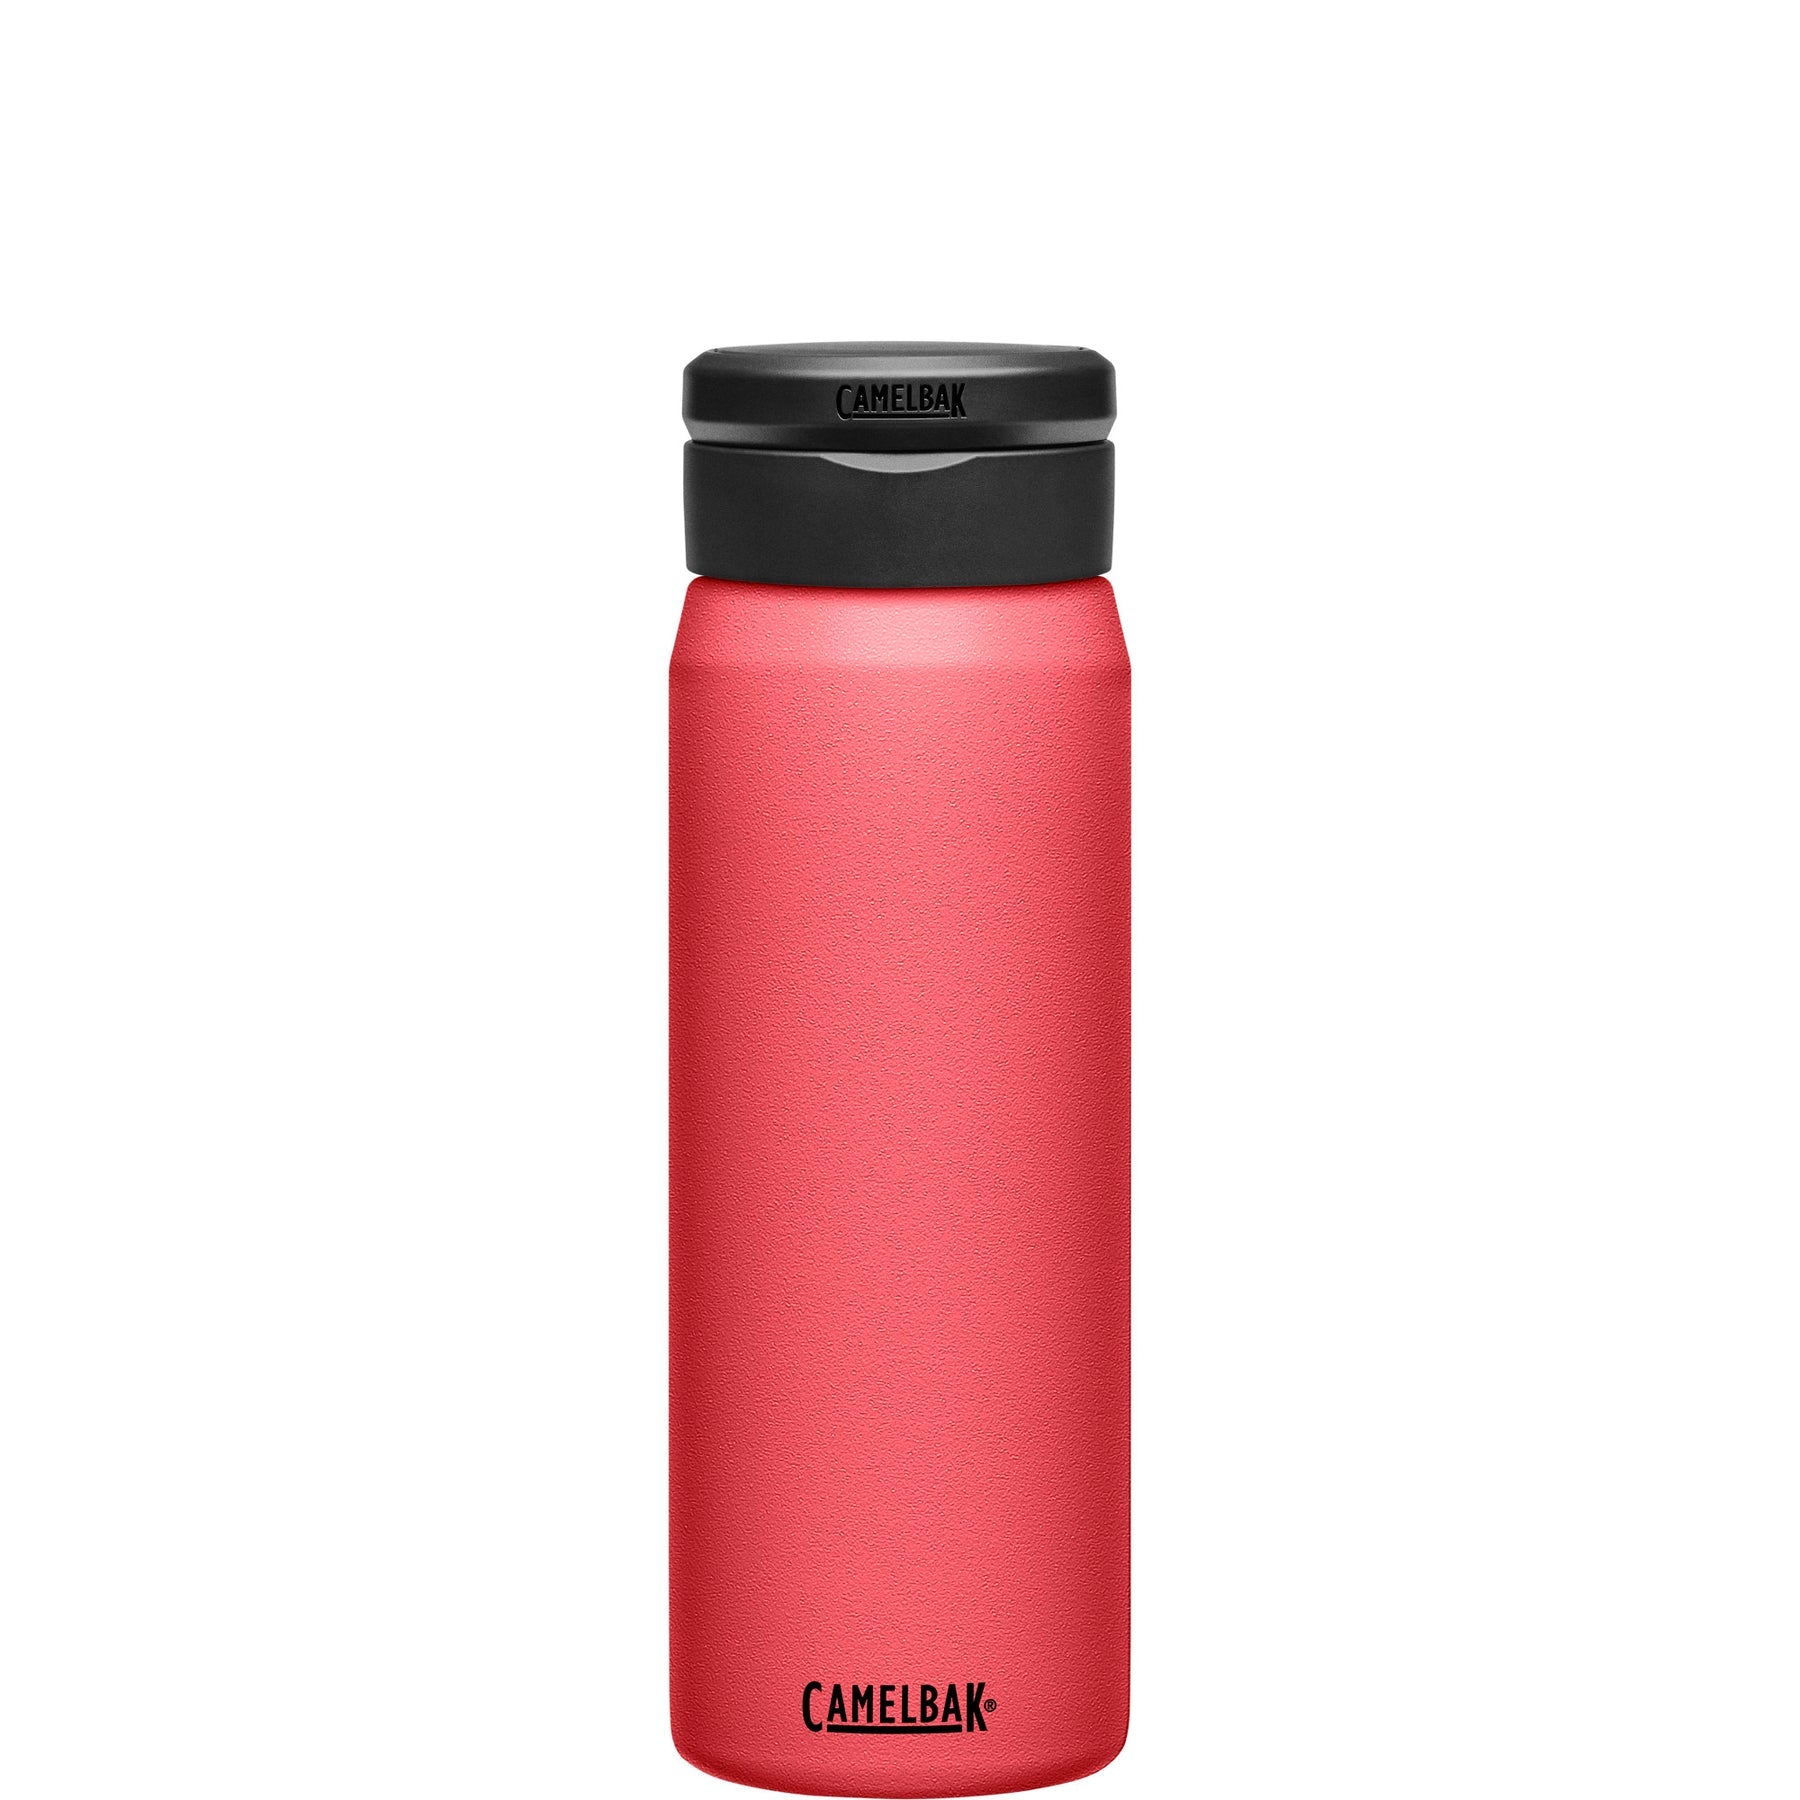 Camelbak Fit Cap Stainless Steel Vacuum Insulated - 750mL